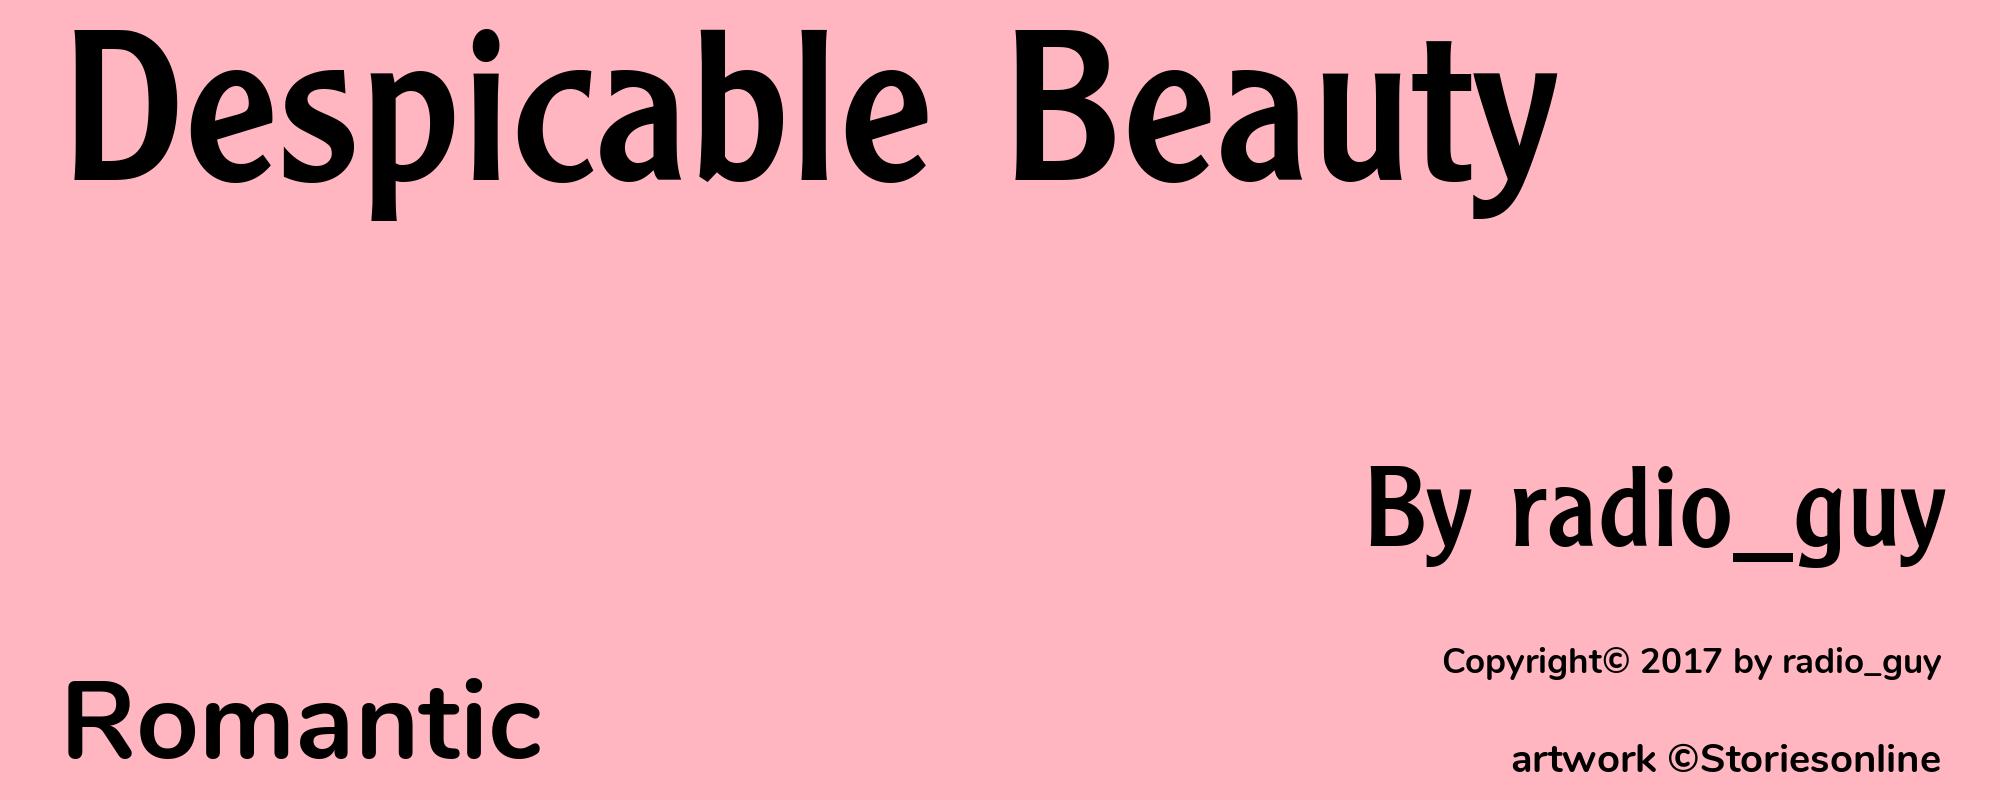 Despicable Beauty - Cover